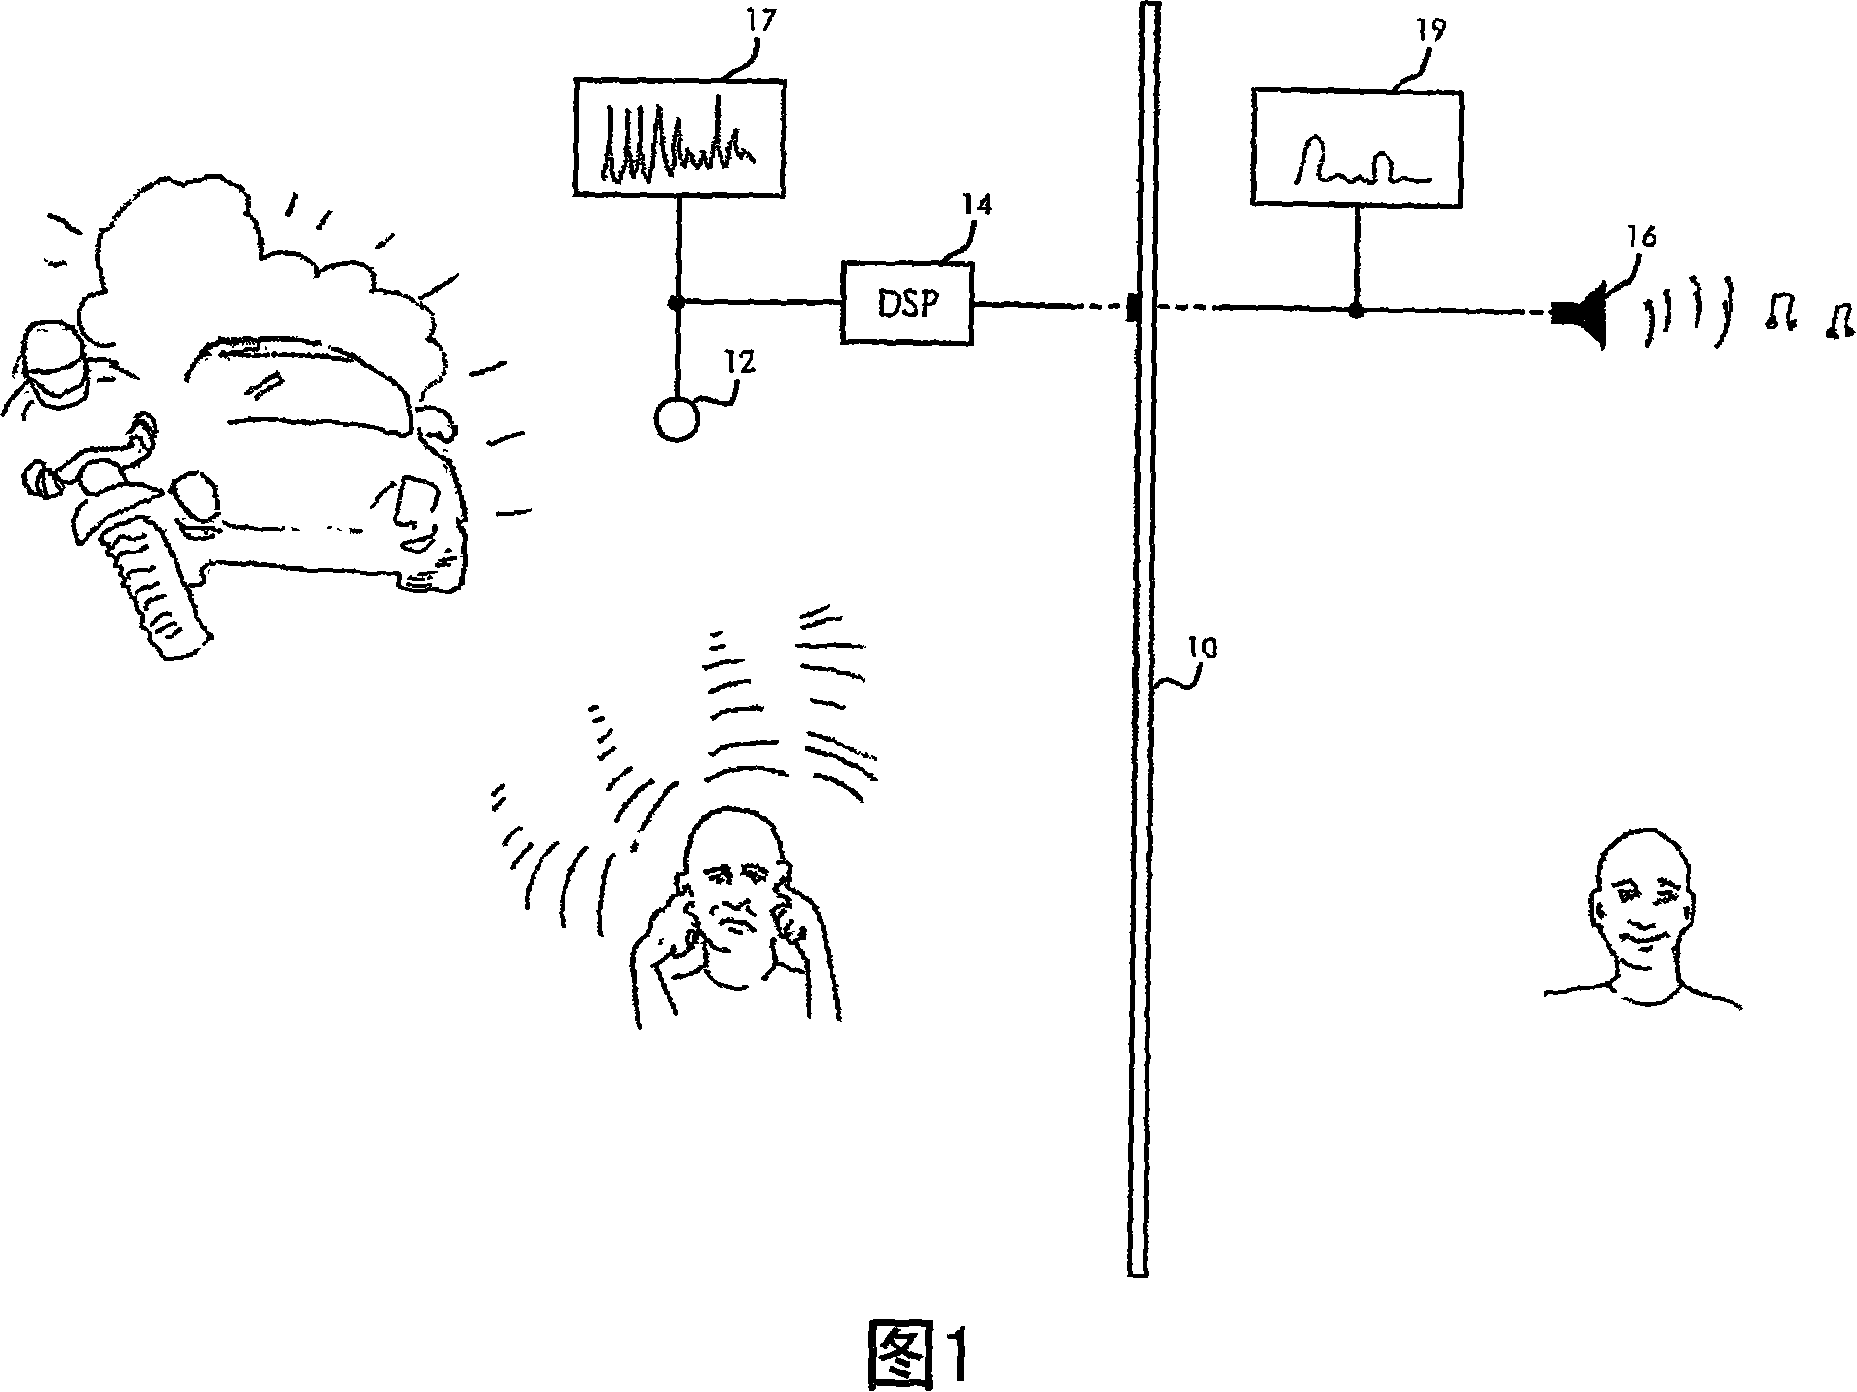 Electronic sound screening system and method of accoustically impoving the environment